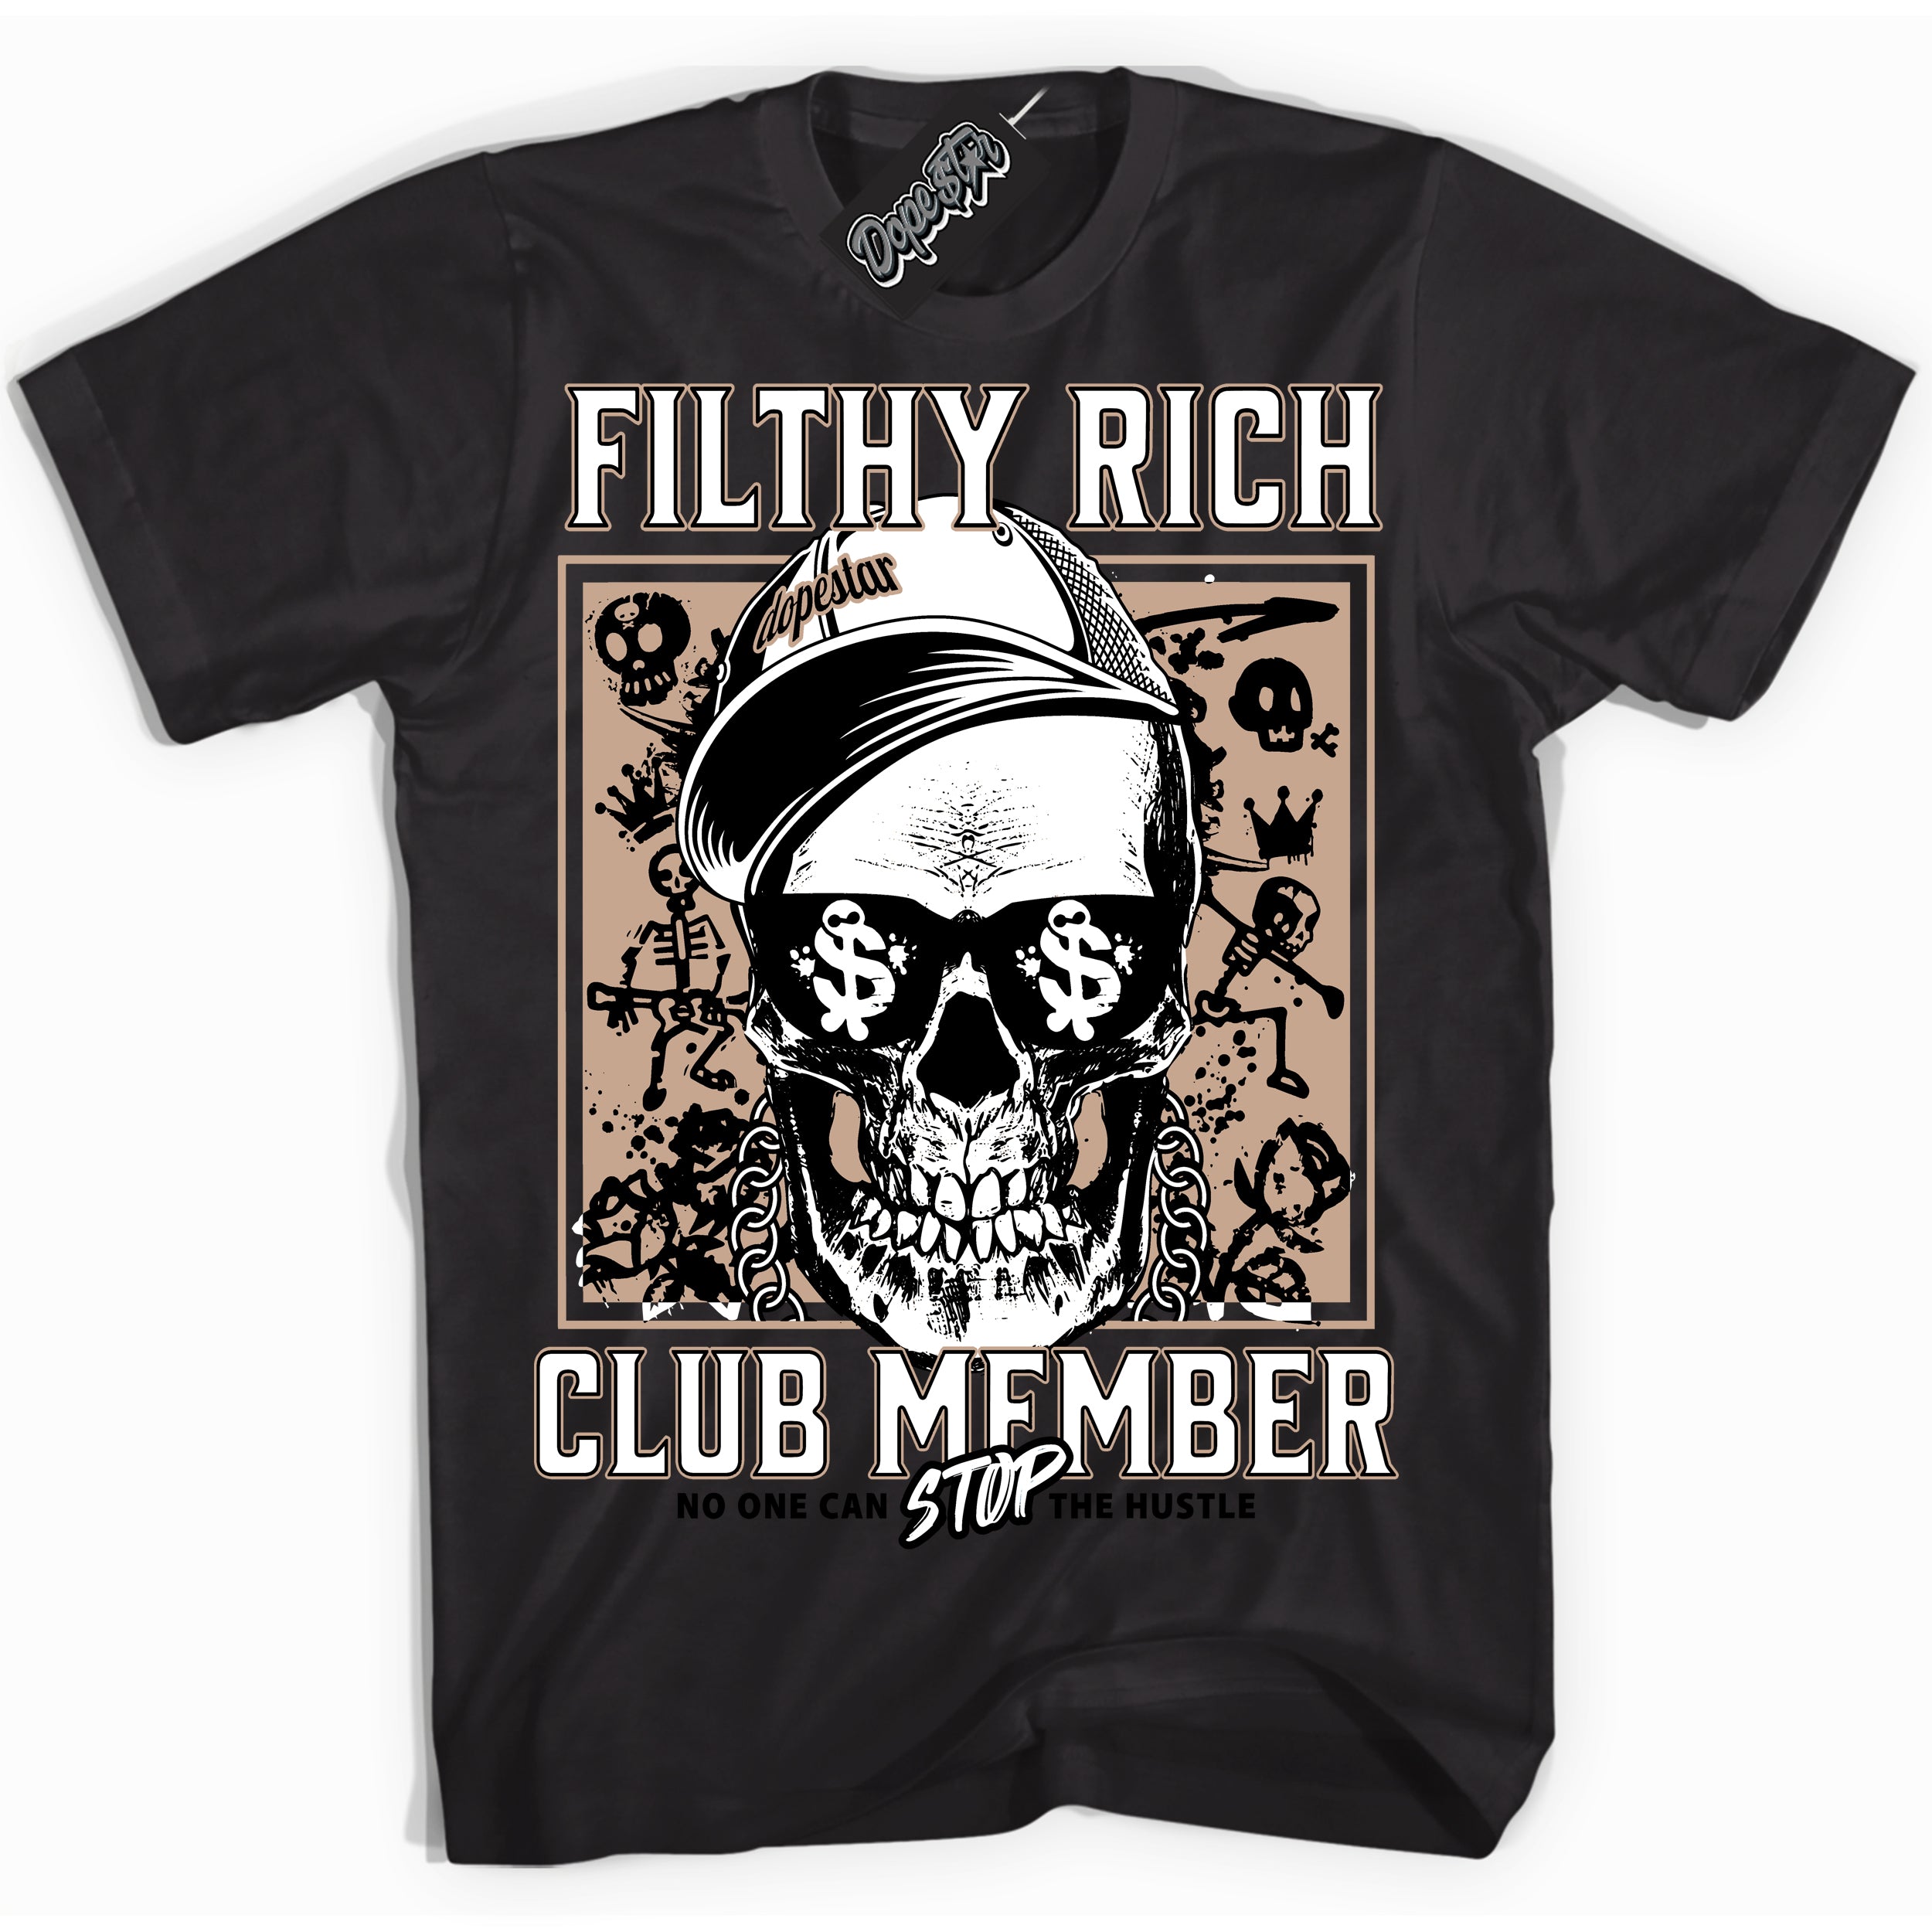 Cool Black Shirt with “ Filthy Rich” design that perfectly matches Neapolitan 11s Sneakers.